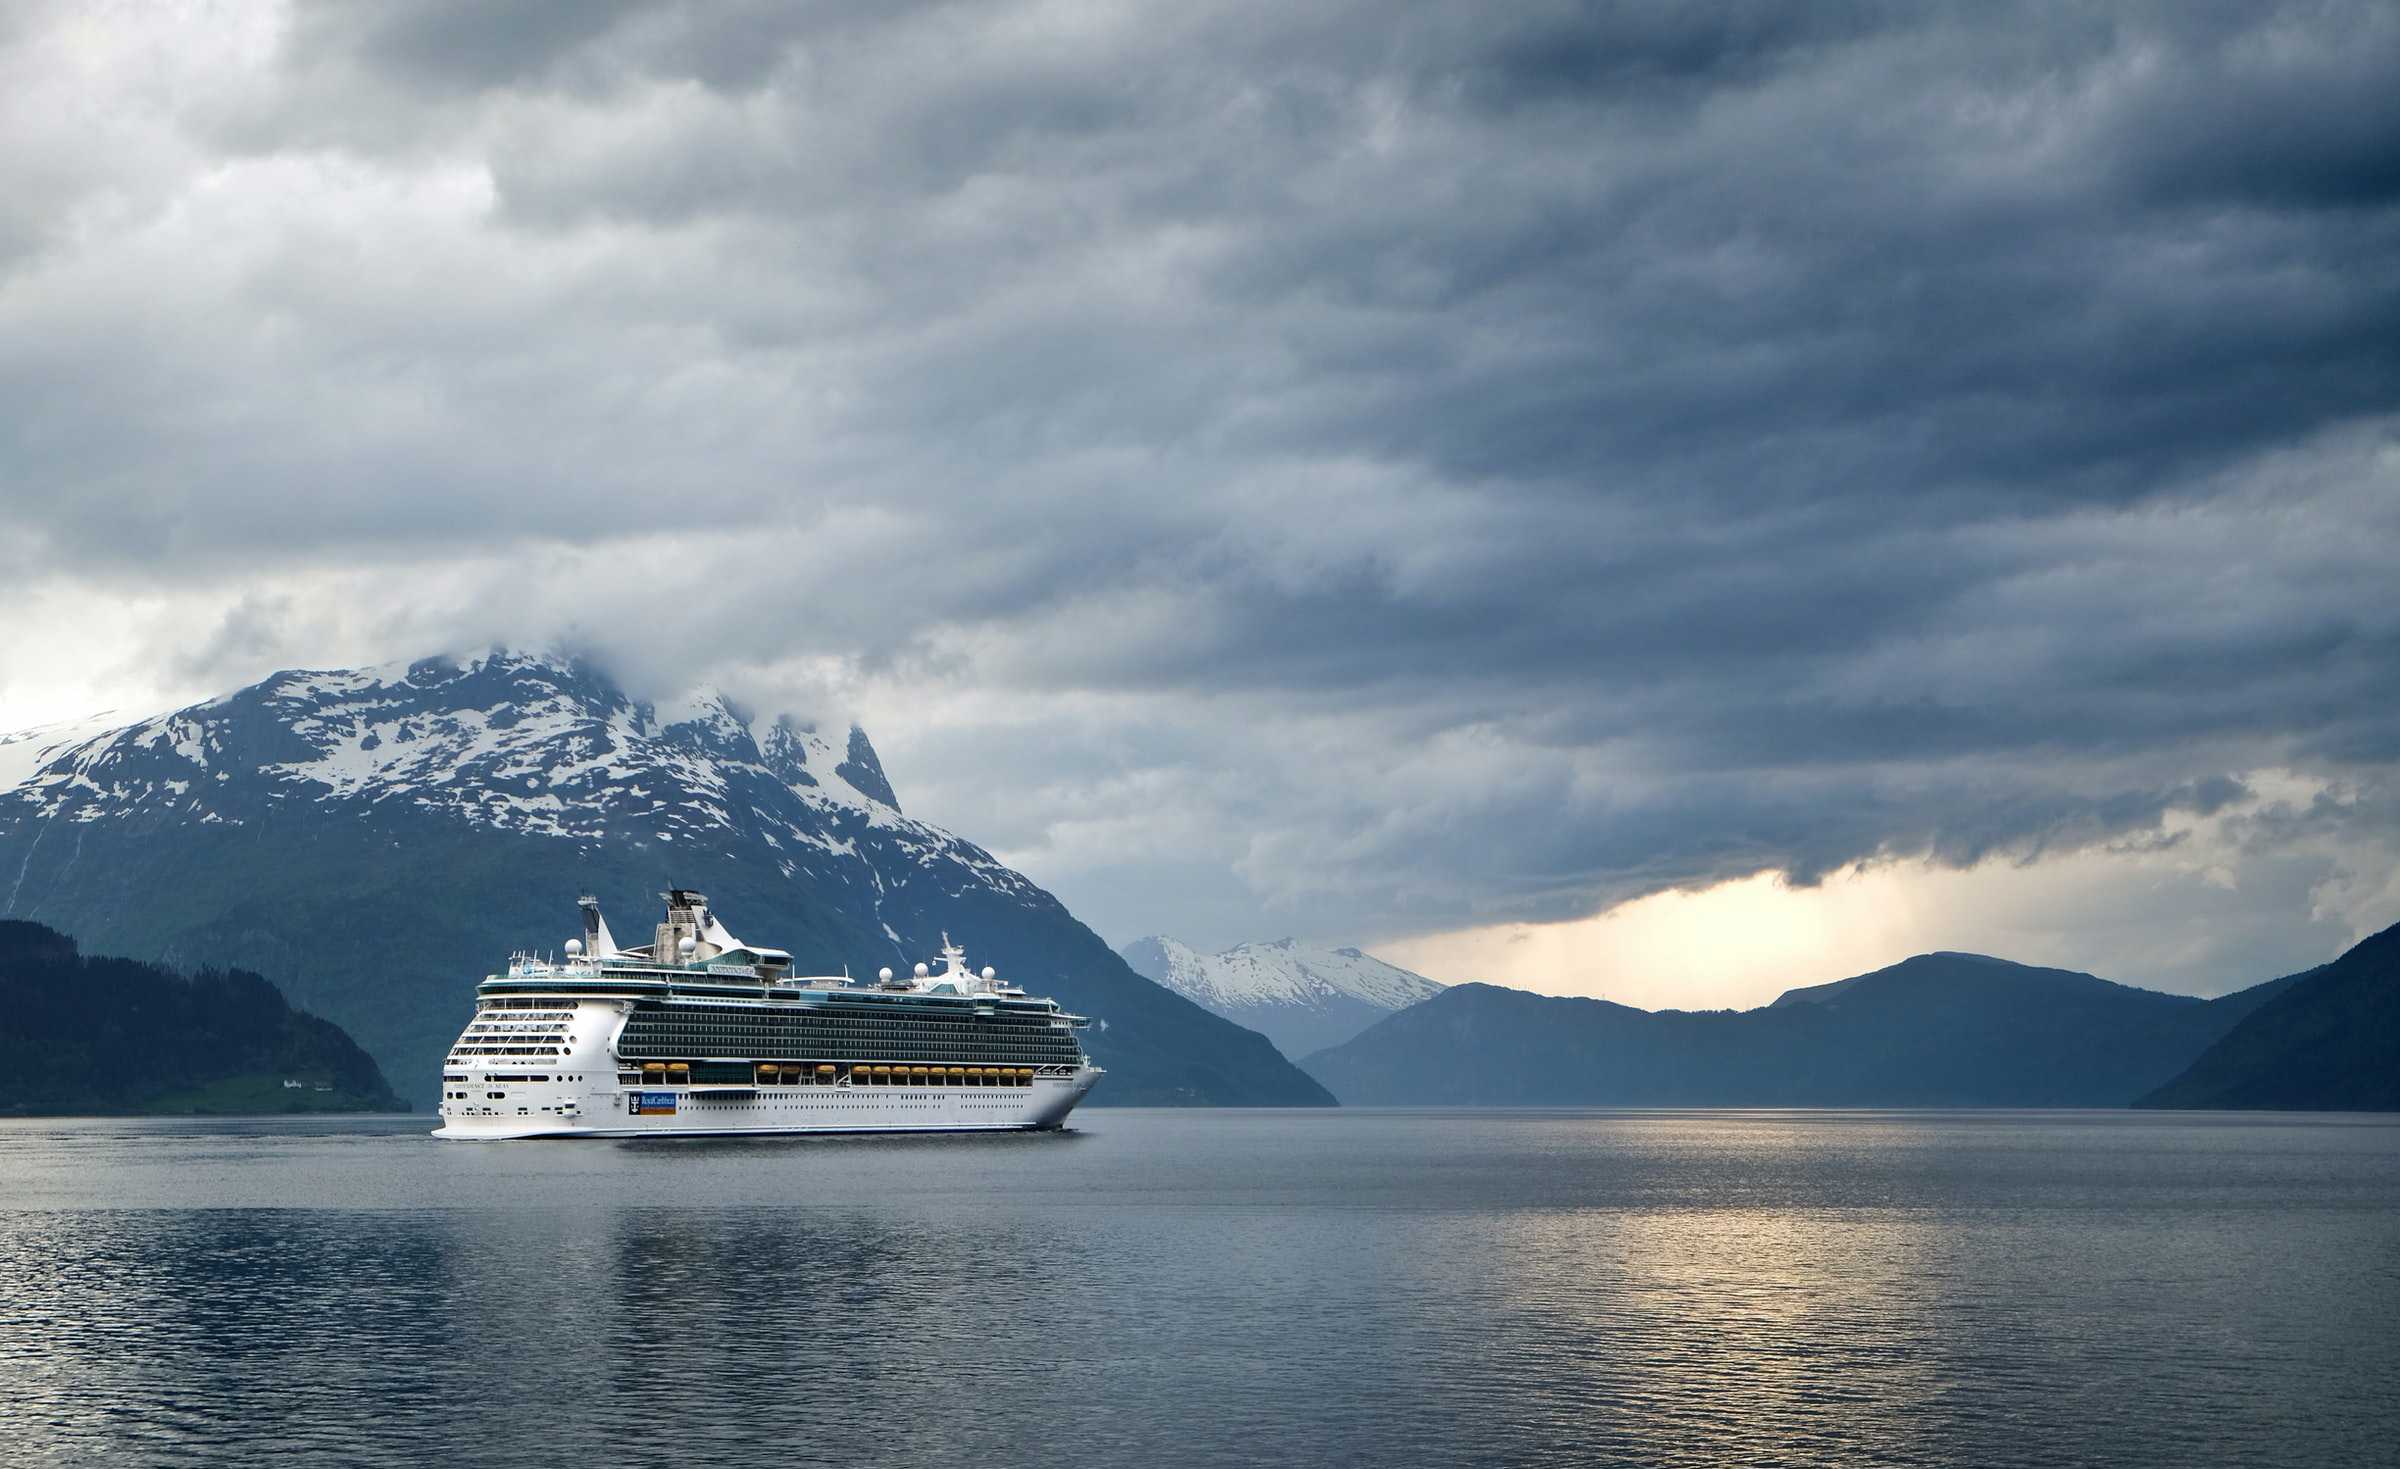 Cruise ship in Nordfjord - one of the great Norwegian fjords. Photo by Steinar Engeland